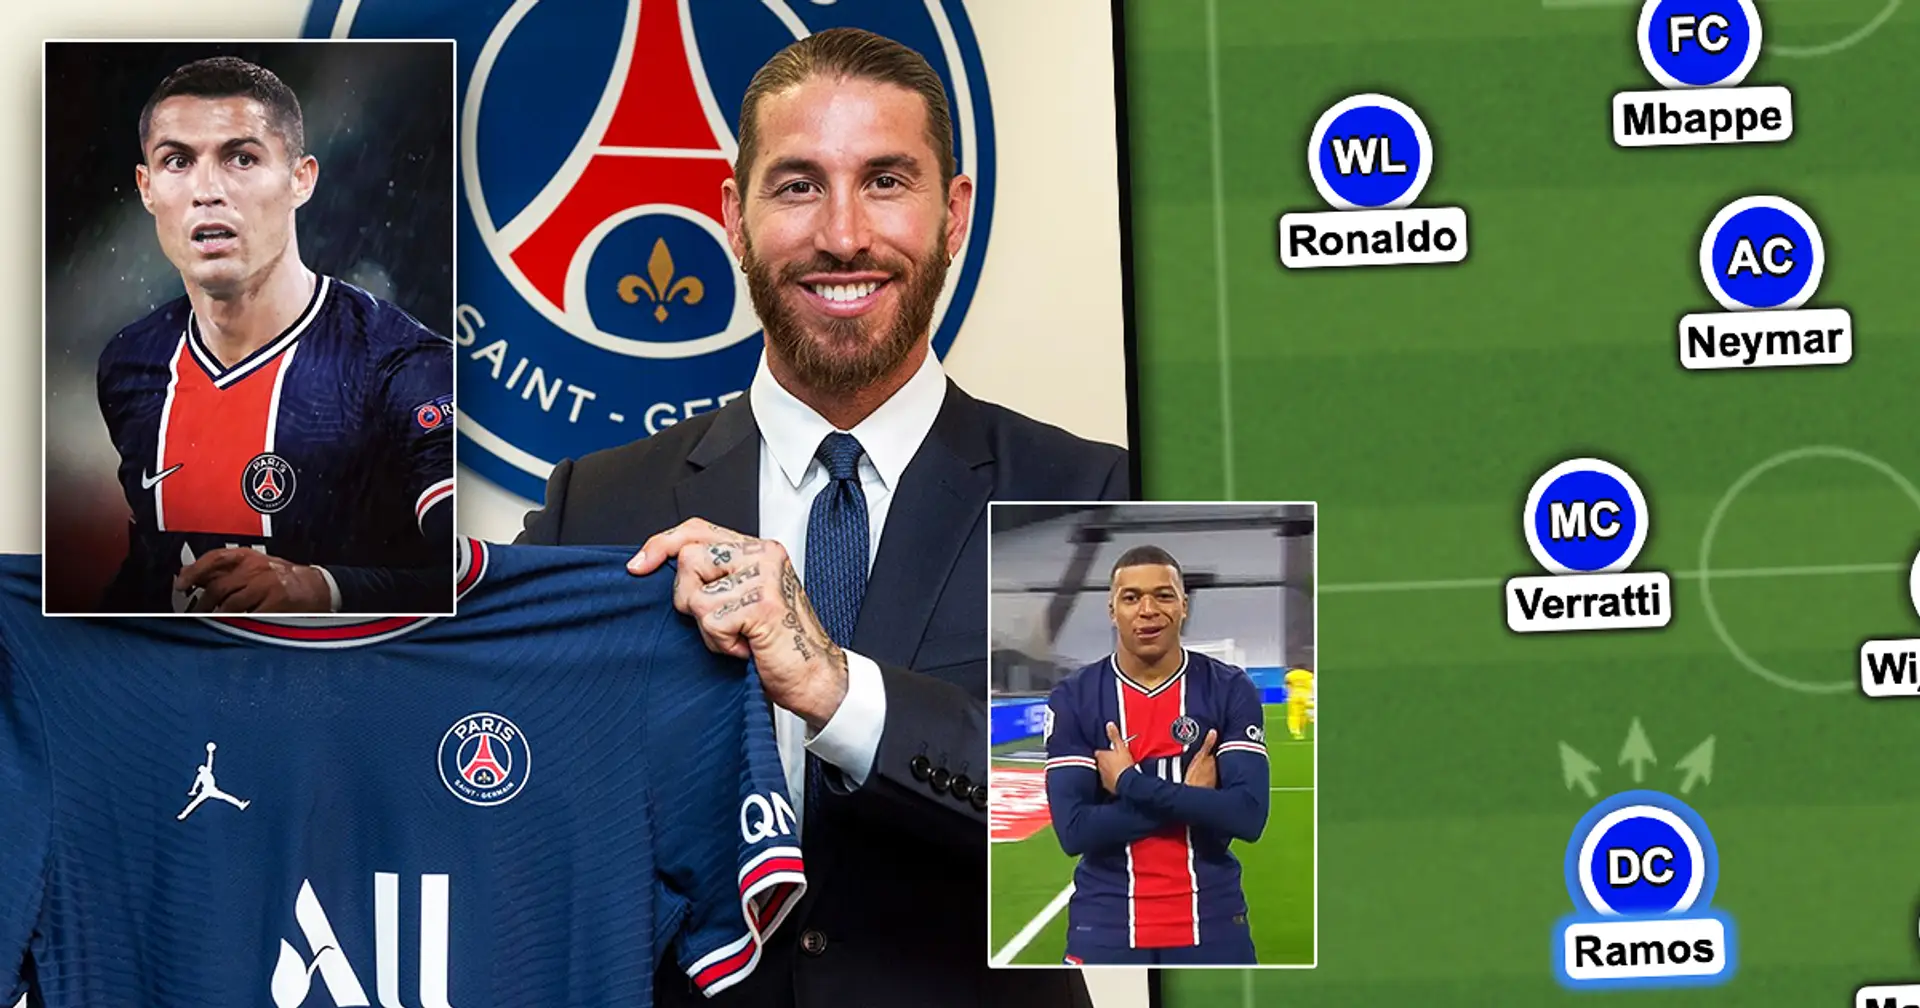 Best team in the world. PSG’s world-class potential squad for next season is incredible